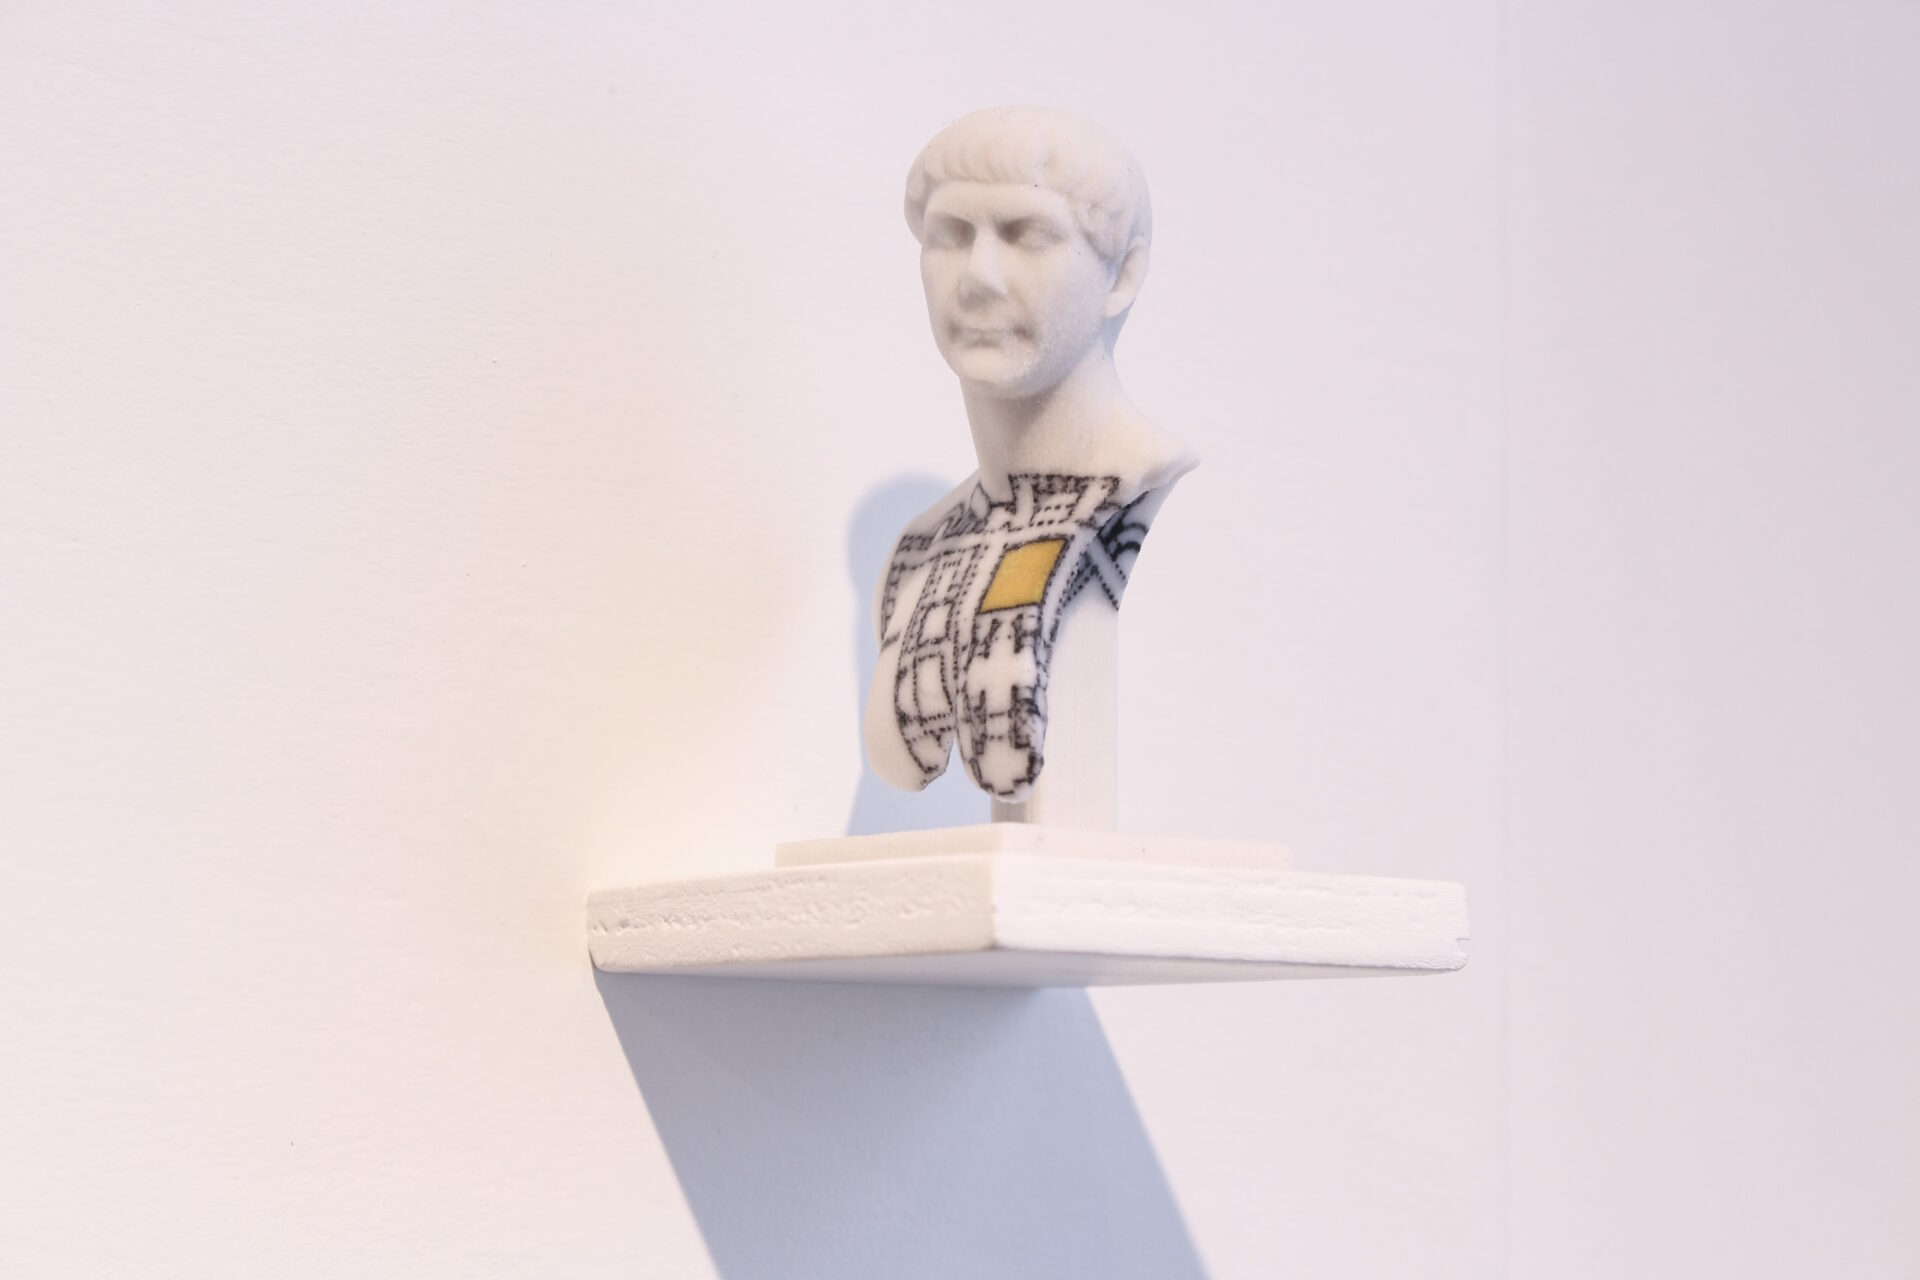 White 3D print of Trajan on a shelf with dimensions of a thermae in black with a yellow square to represent the location.